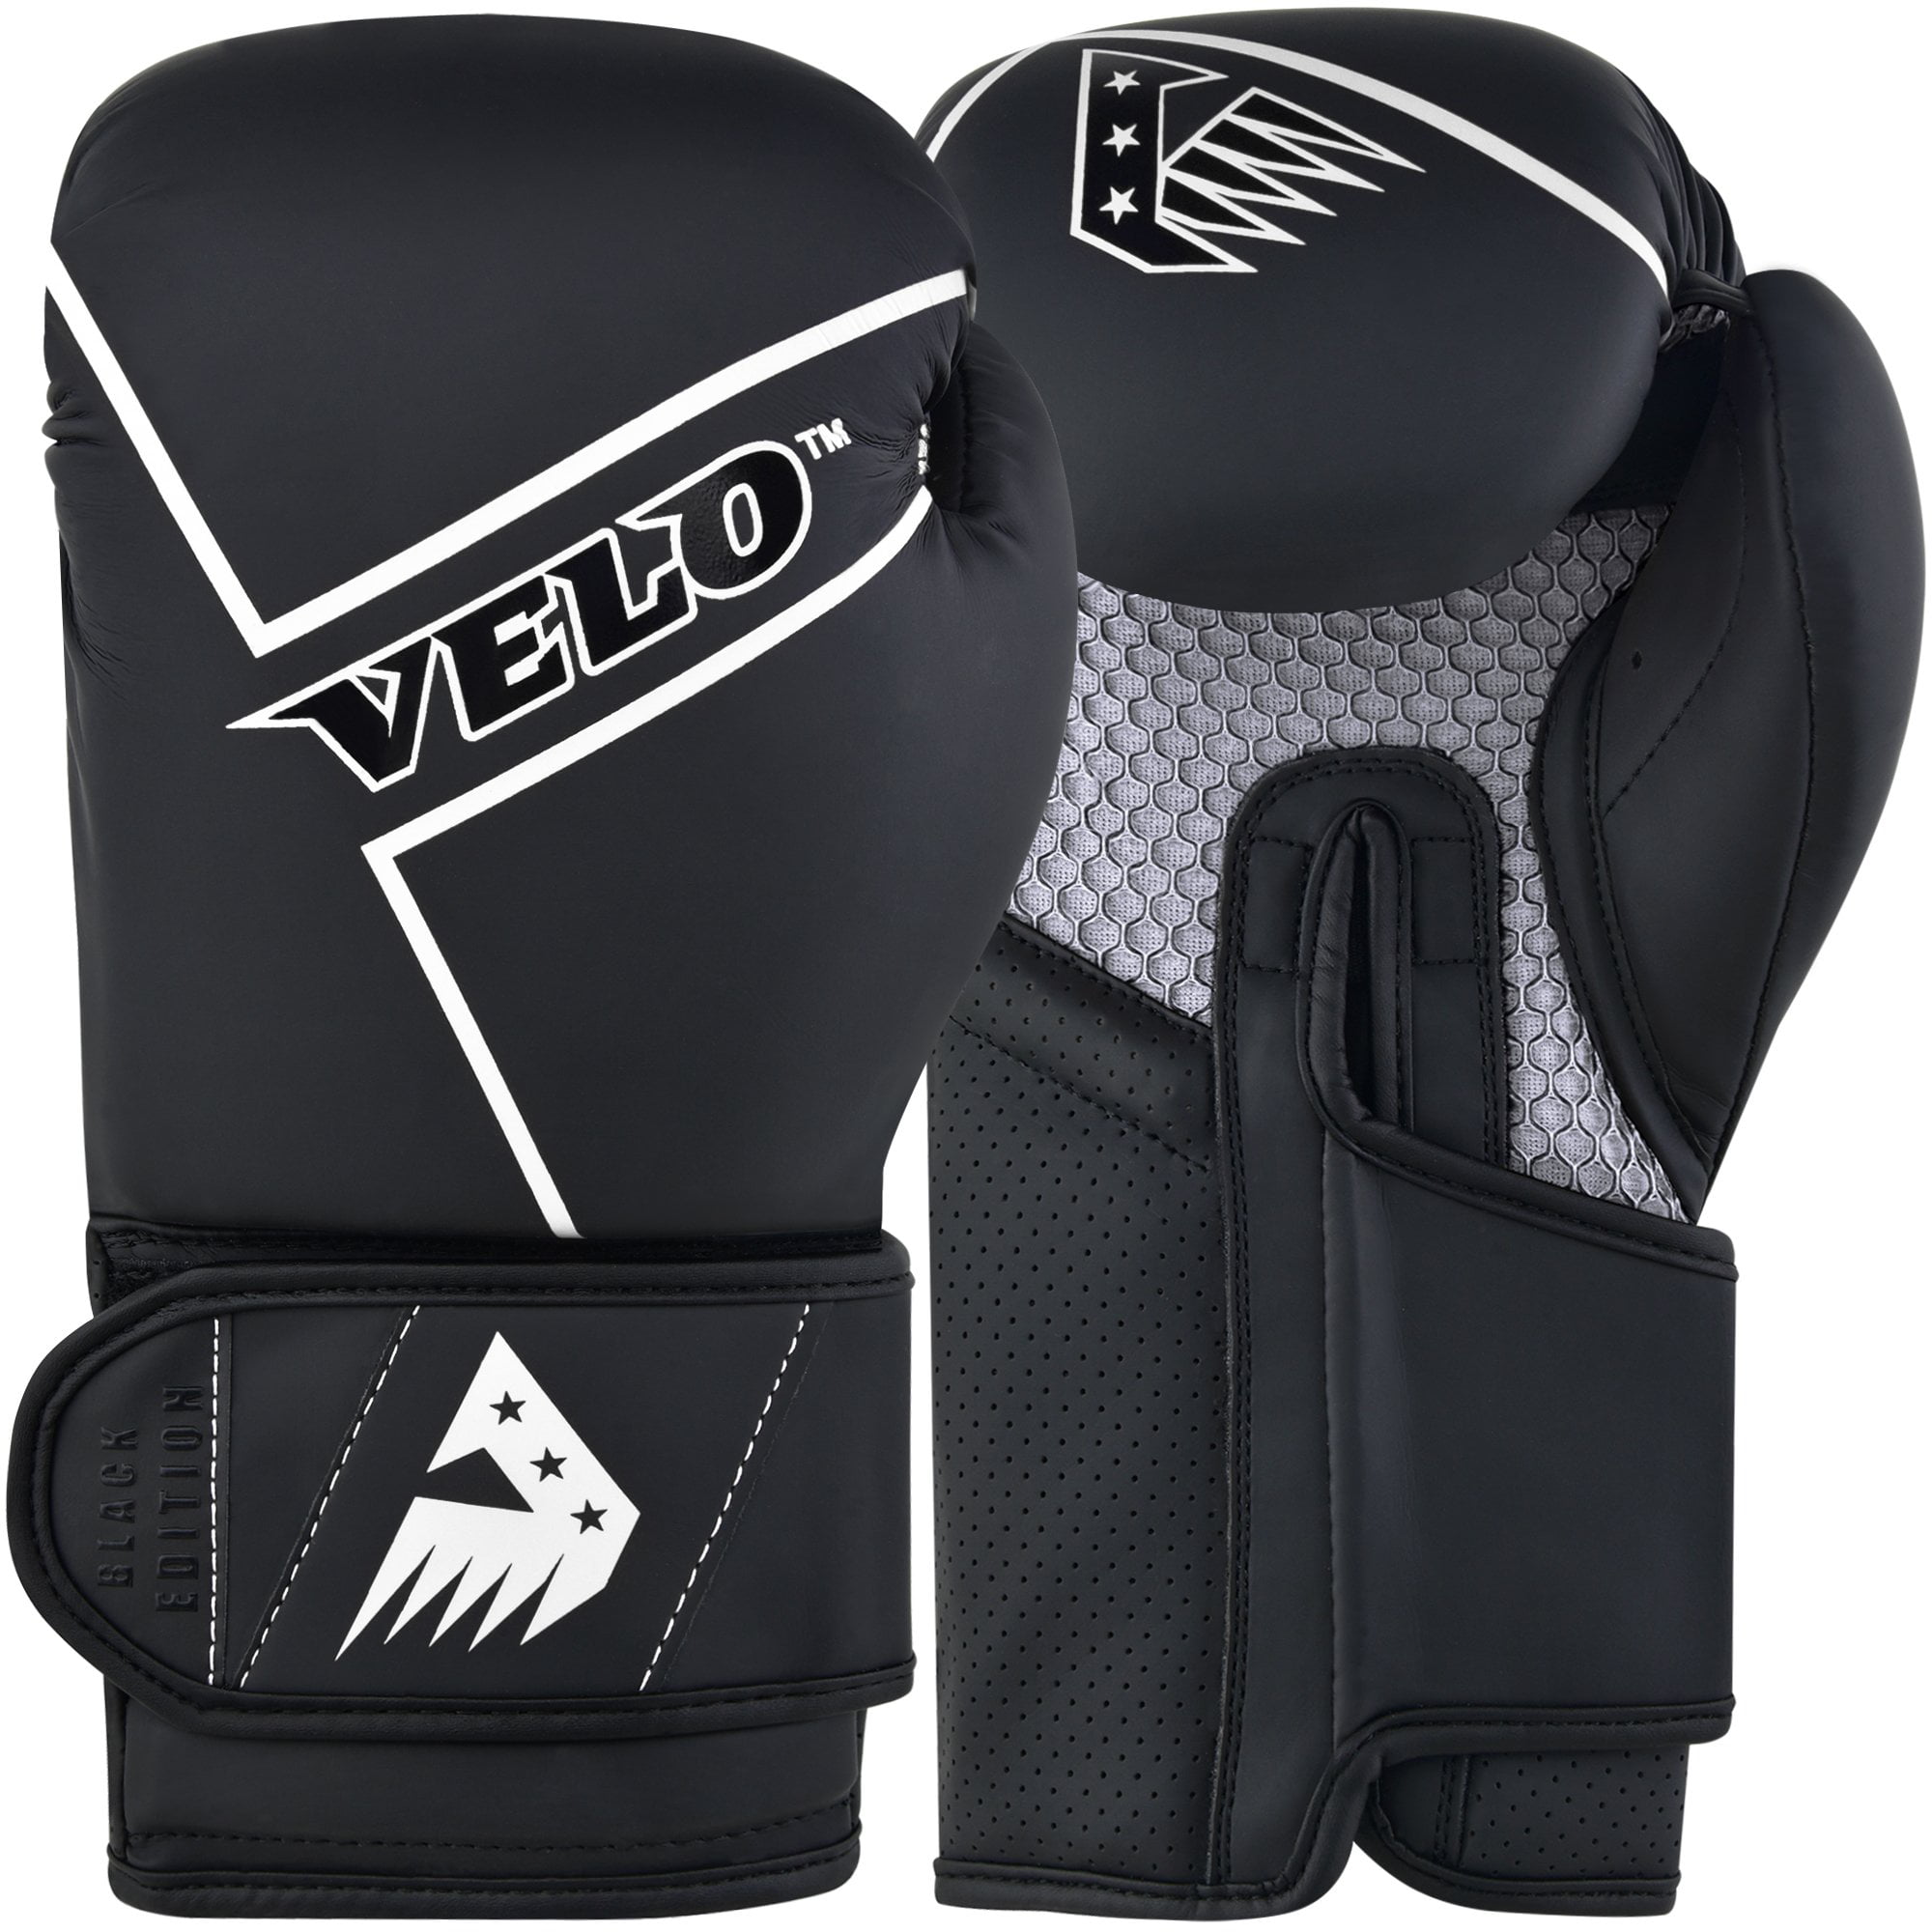 VELO Boxing Pads and Gloves Training Hook Focus Punch Mitts Matt Leather Set 